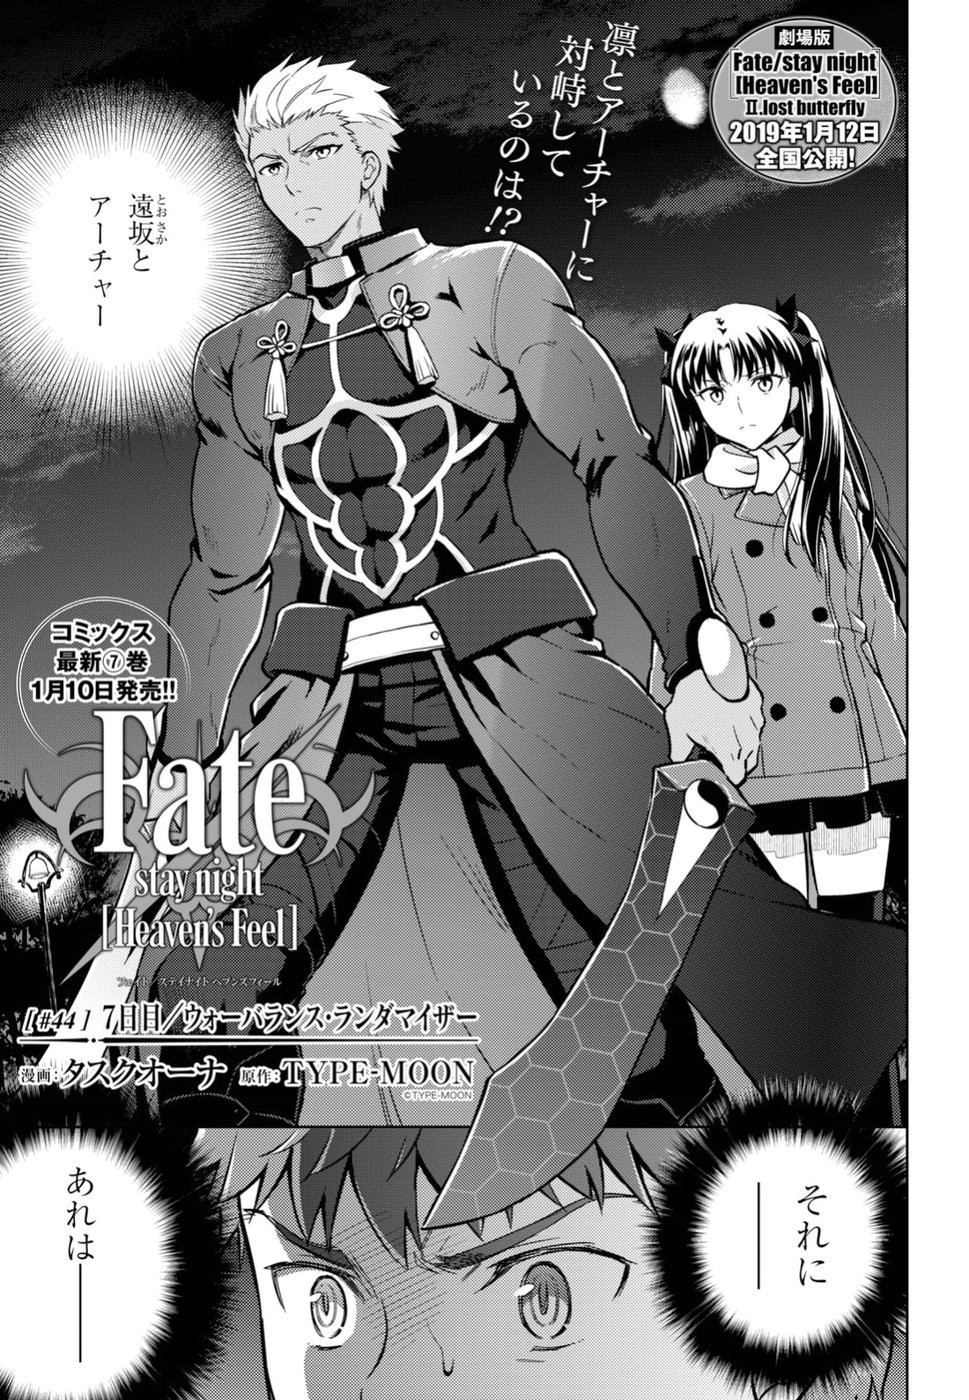 Fate/Stay night Heaven's Feel - Chapter 44 - Page 3